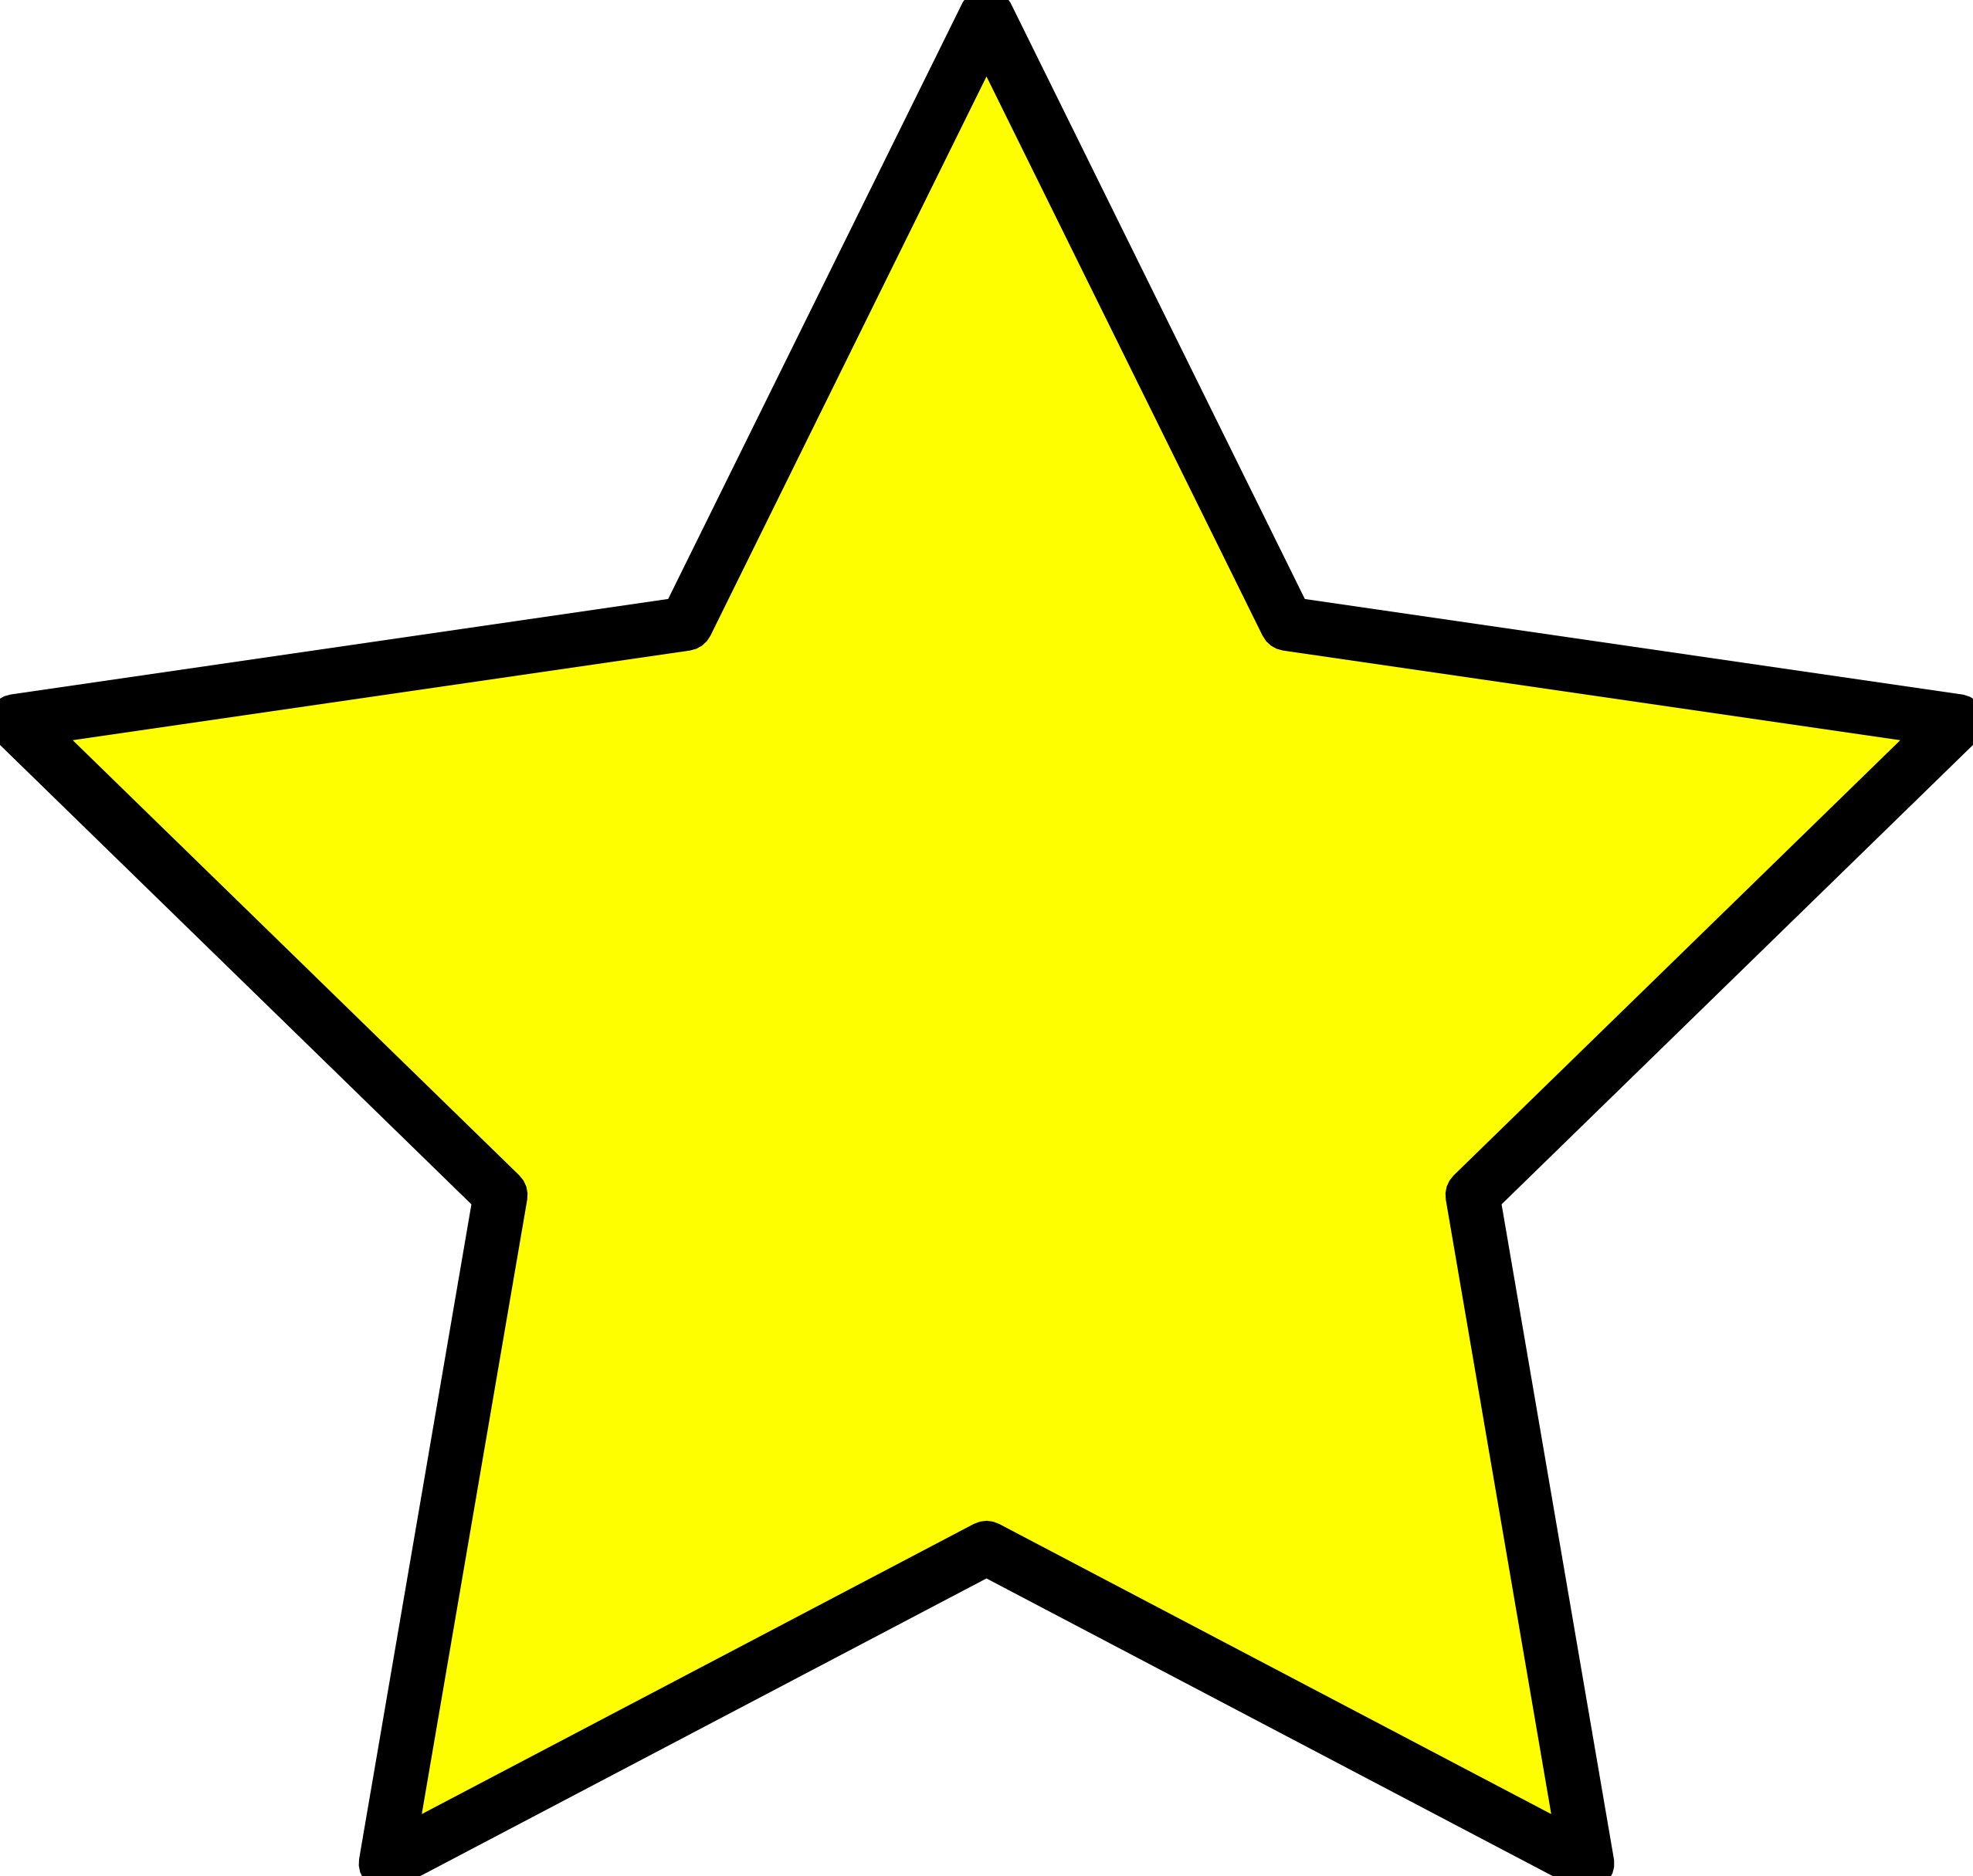 Star Vector Png - ClipArt Best